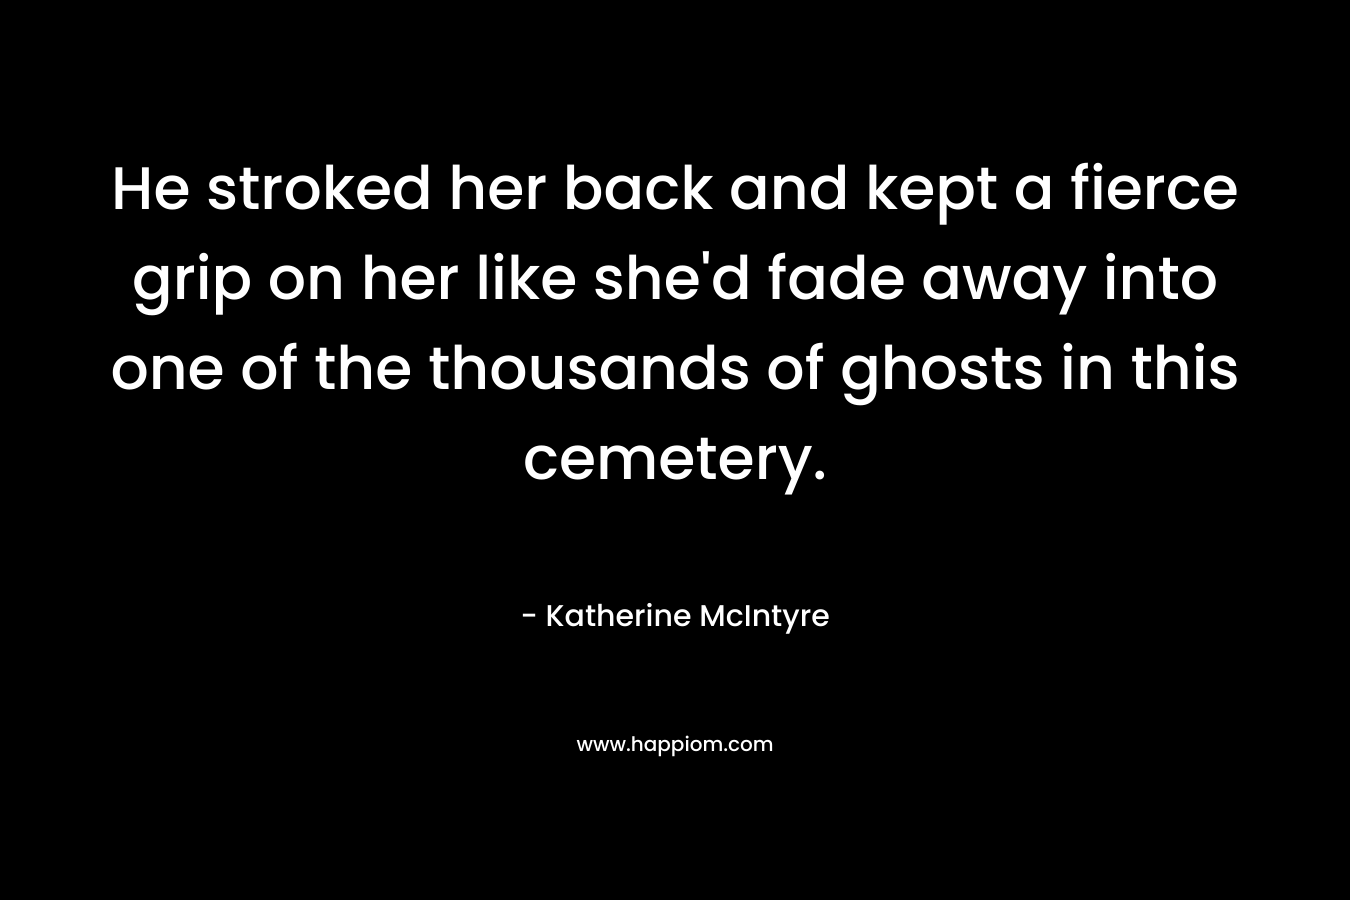 He stroked her back and kept a fierce grip on her like she’d fade away into one of the thousands of ghosts in this cemetery. – Katherine McIntyre